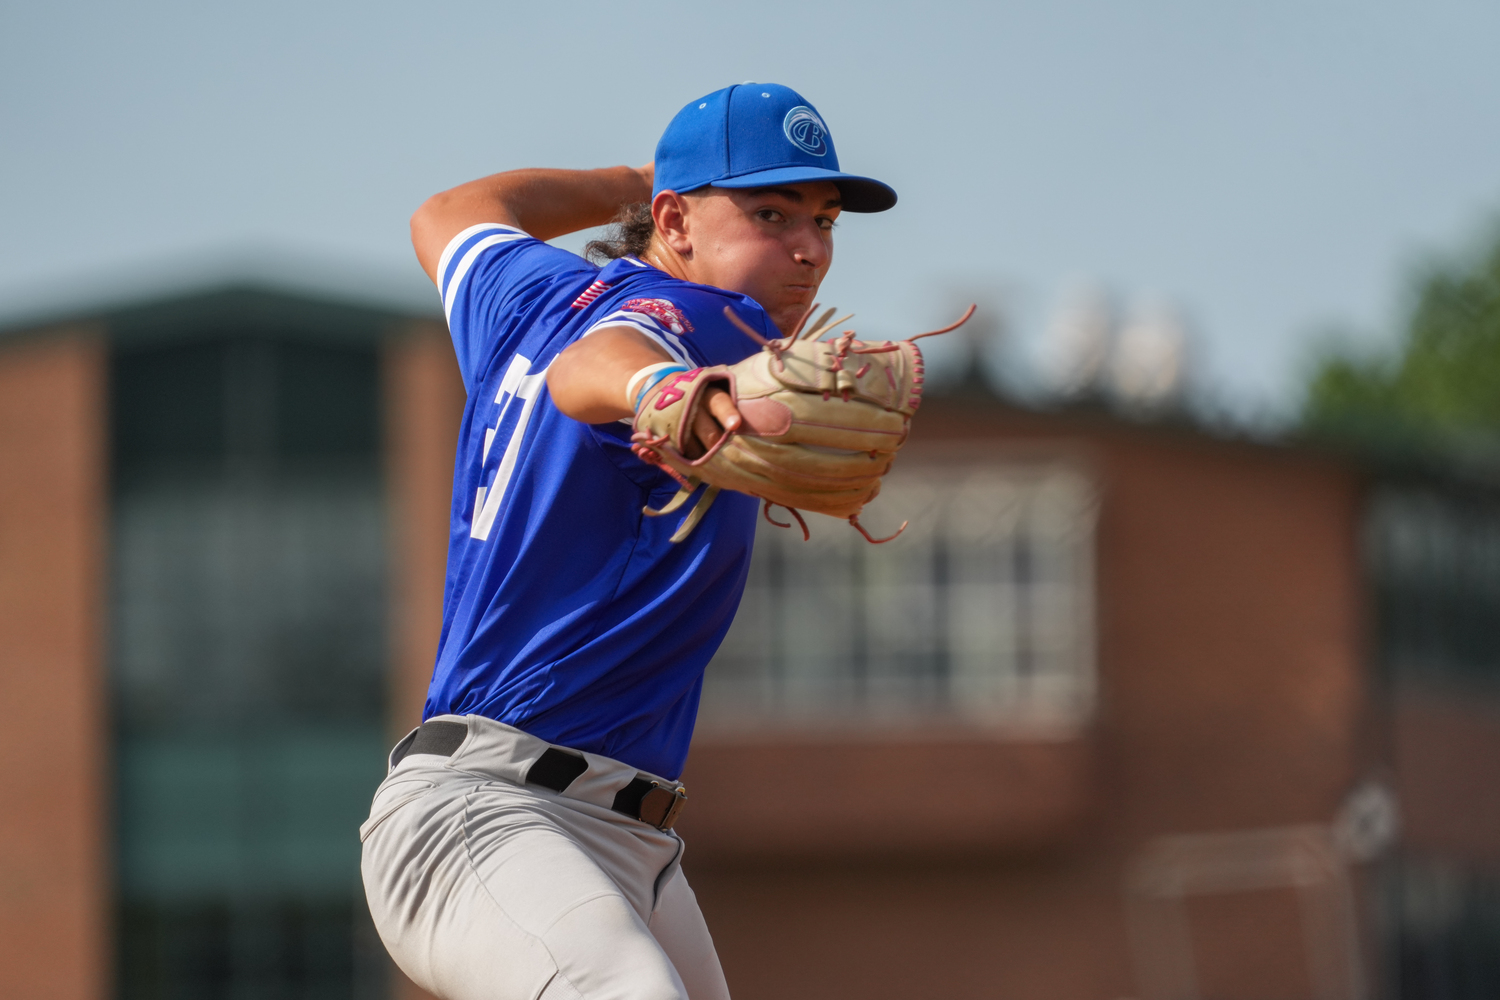 Steven Hardiman (Bentley) put together one of his best starts of the summer on Saturday for the Breakers, pitching six shutout innings in which he only allowed two hits.   RON ESPOSITO